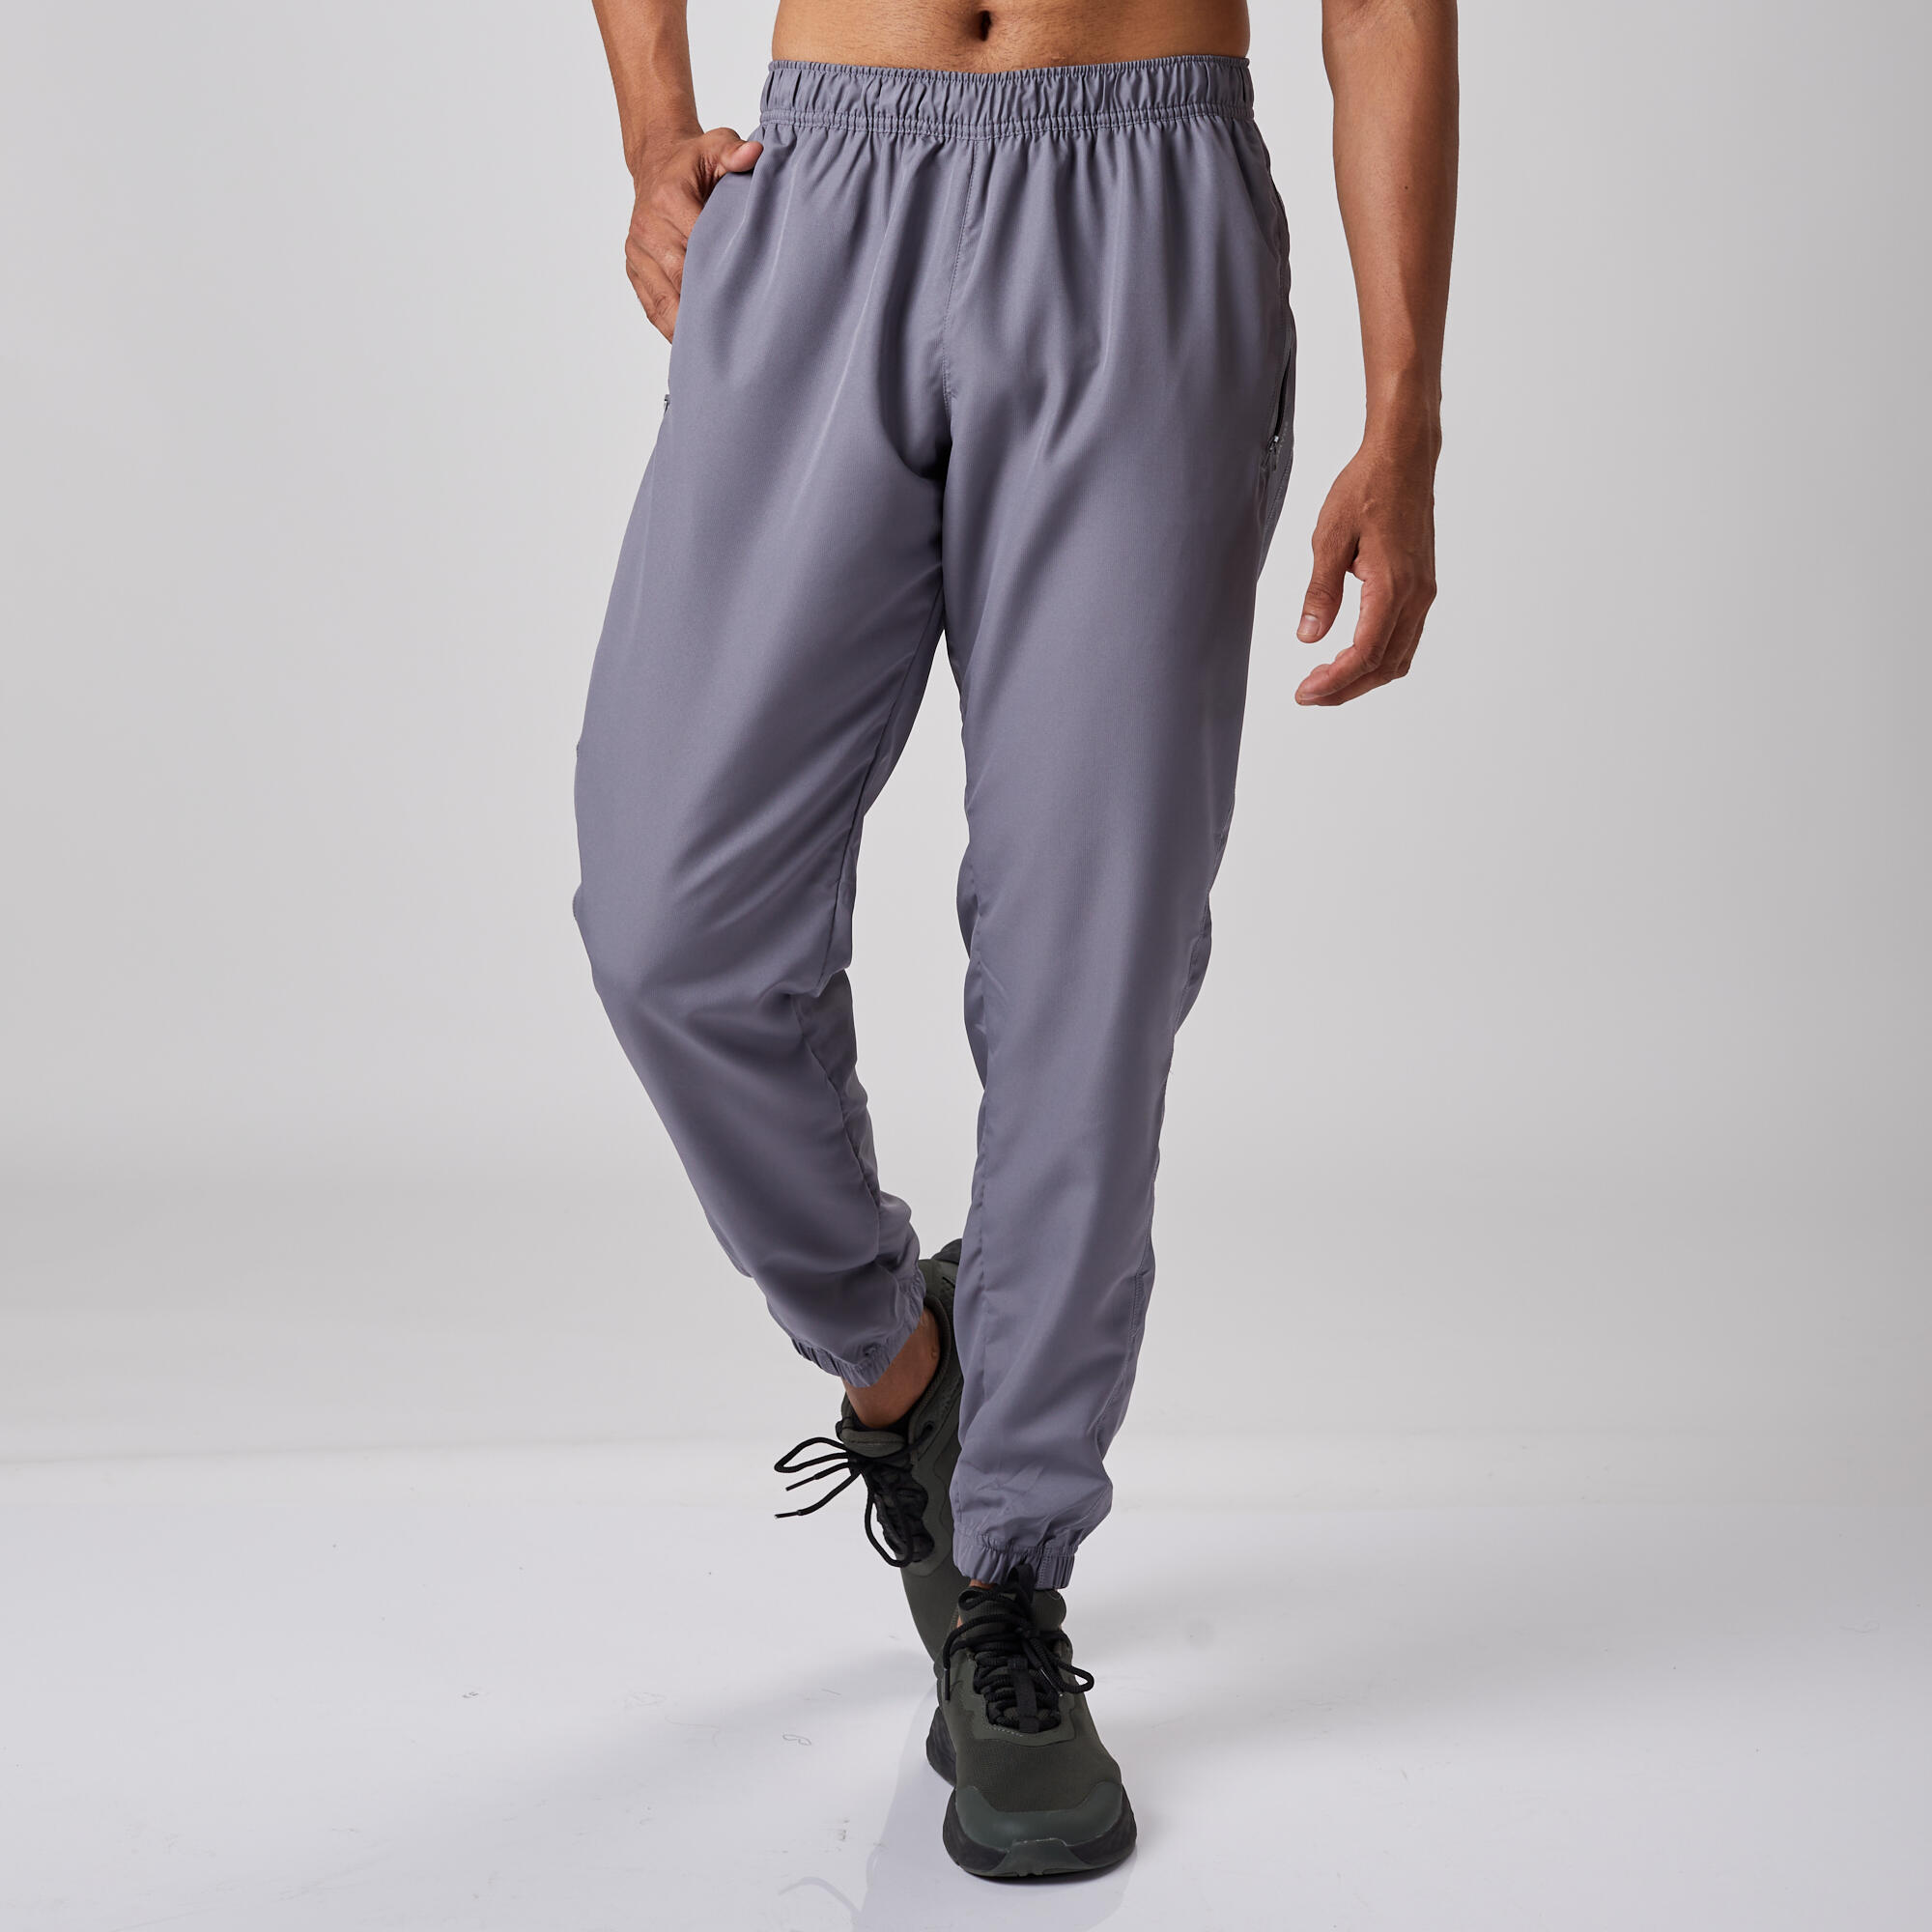 Buy Dolce & Gabbana Elastic Pants & Trousers online - Men - 1 products |  FASHIOLA.in